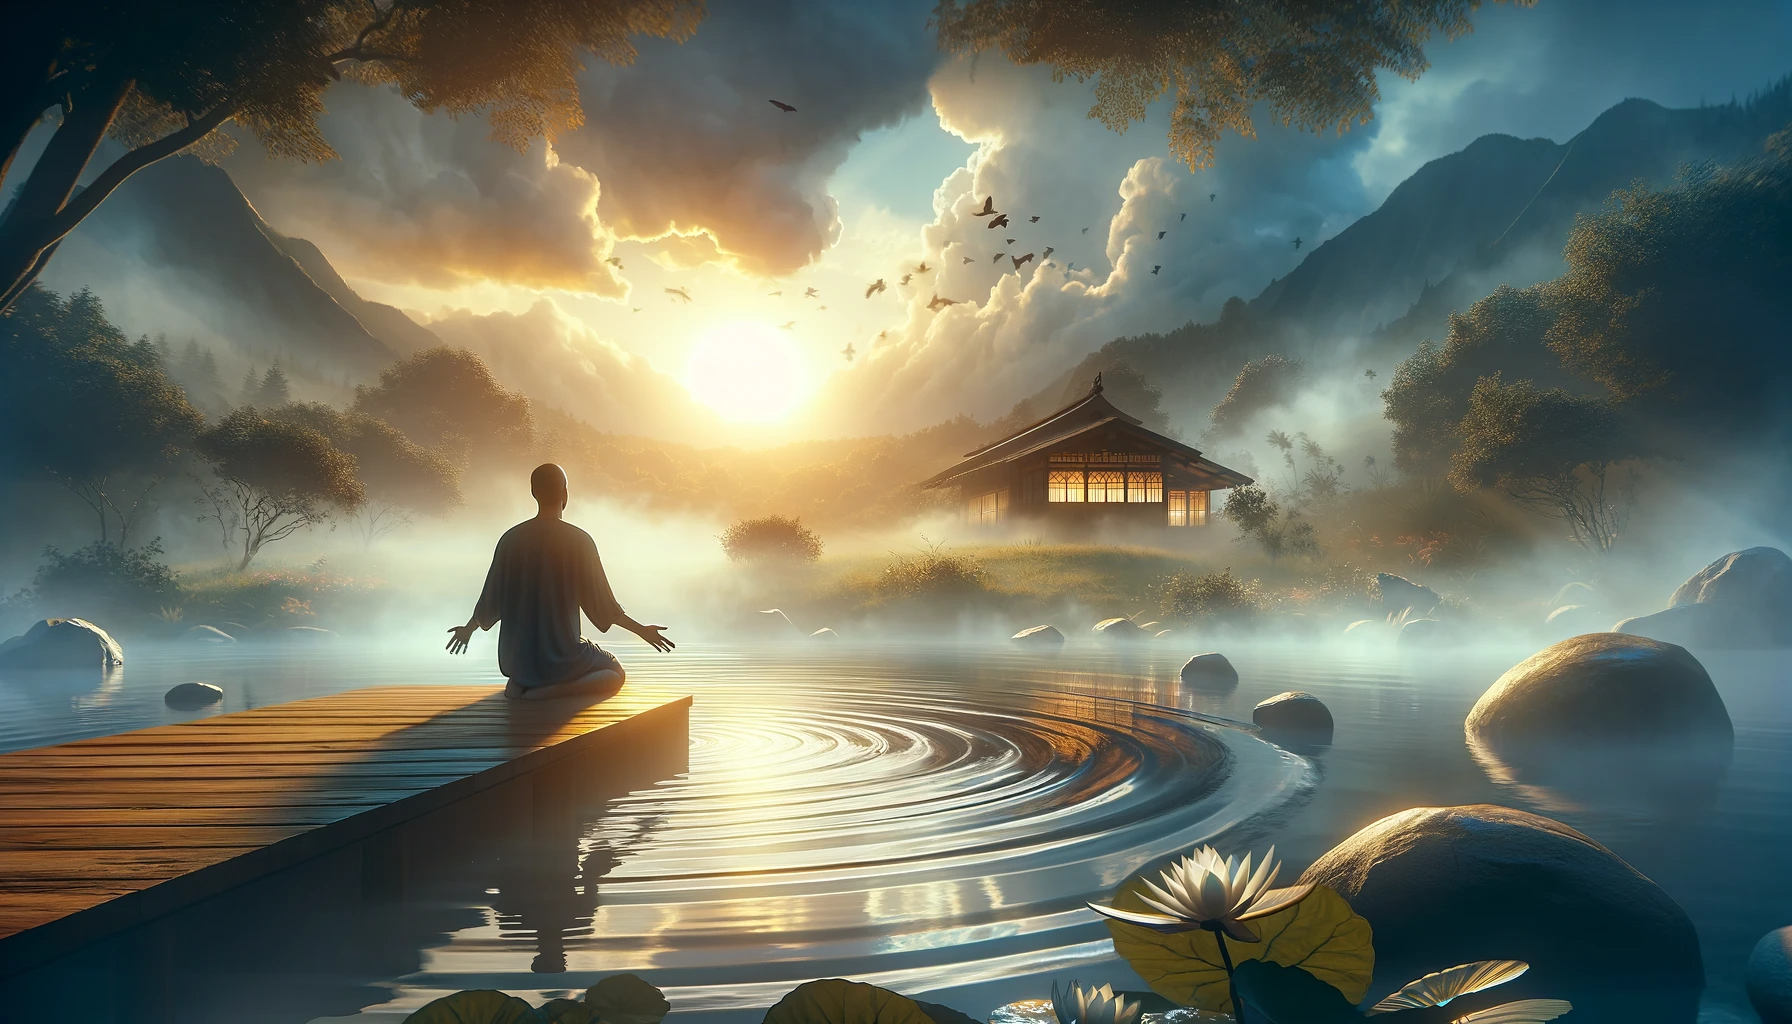 An image that visualizes the concept of 'surrender to win' in the context of recovery. The scene should depict a peaceful and hopeful setting, perhaps